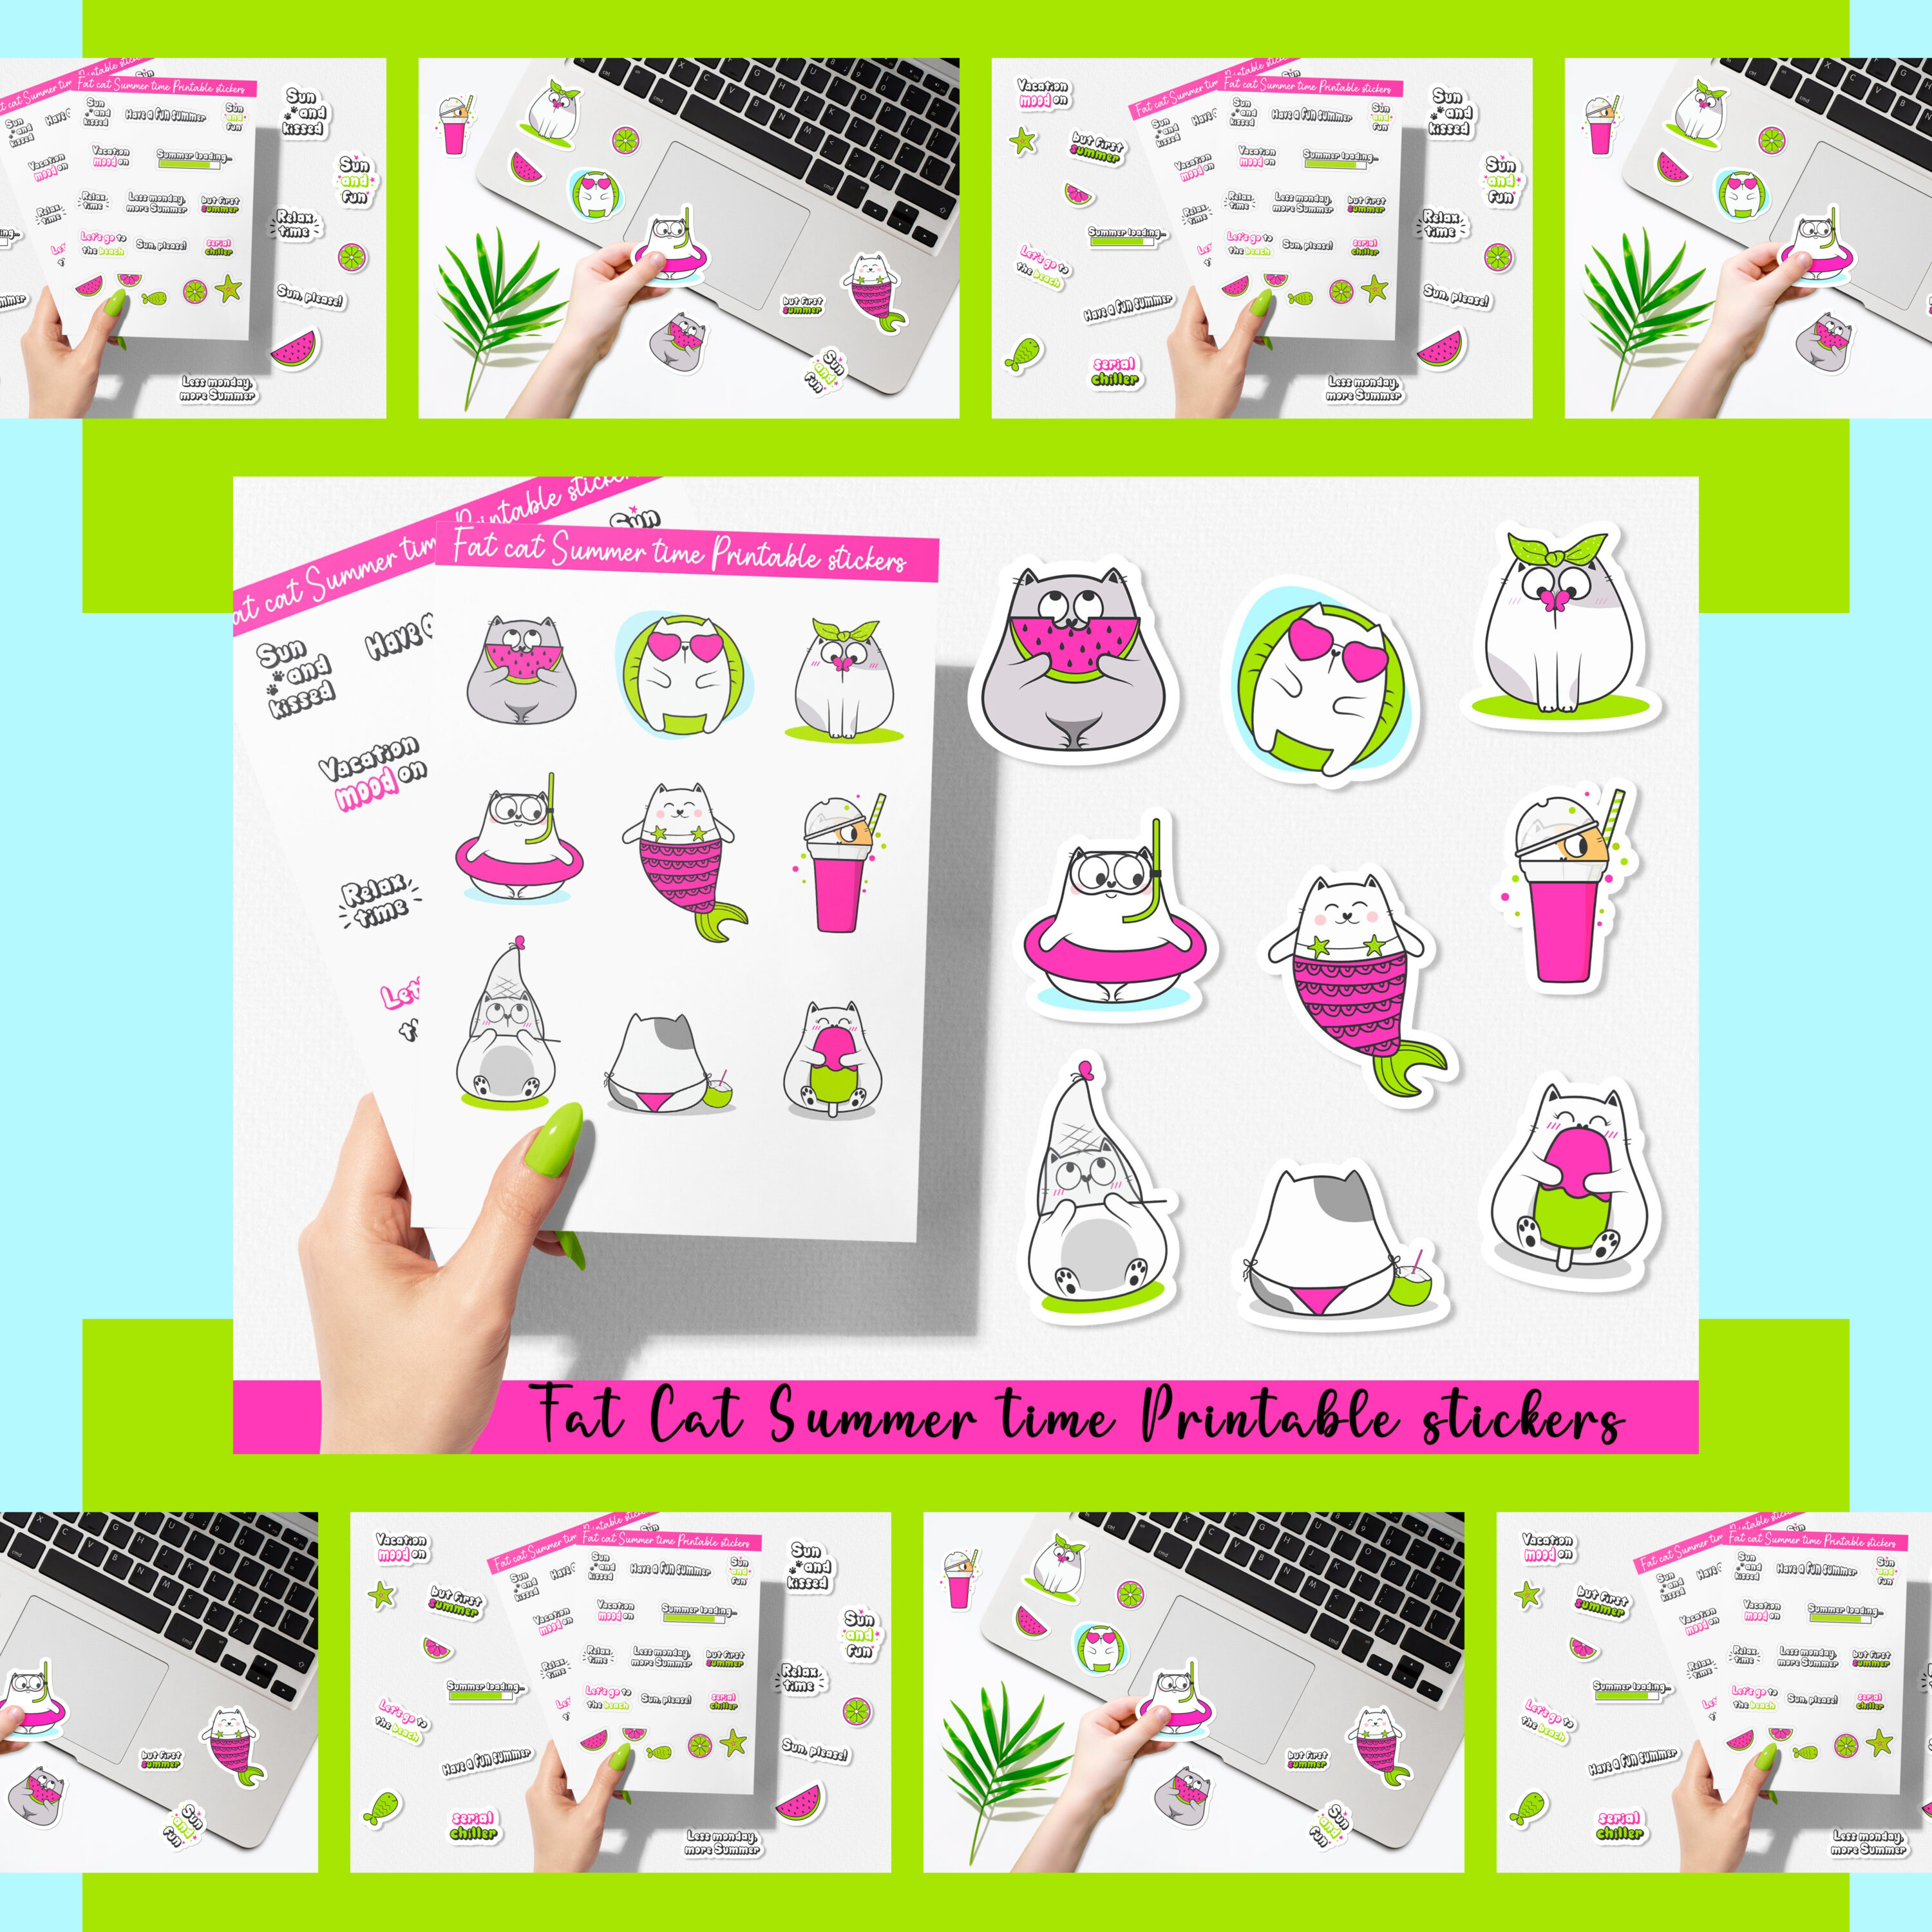 Prints of fat cat summer time printable stickers.